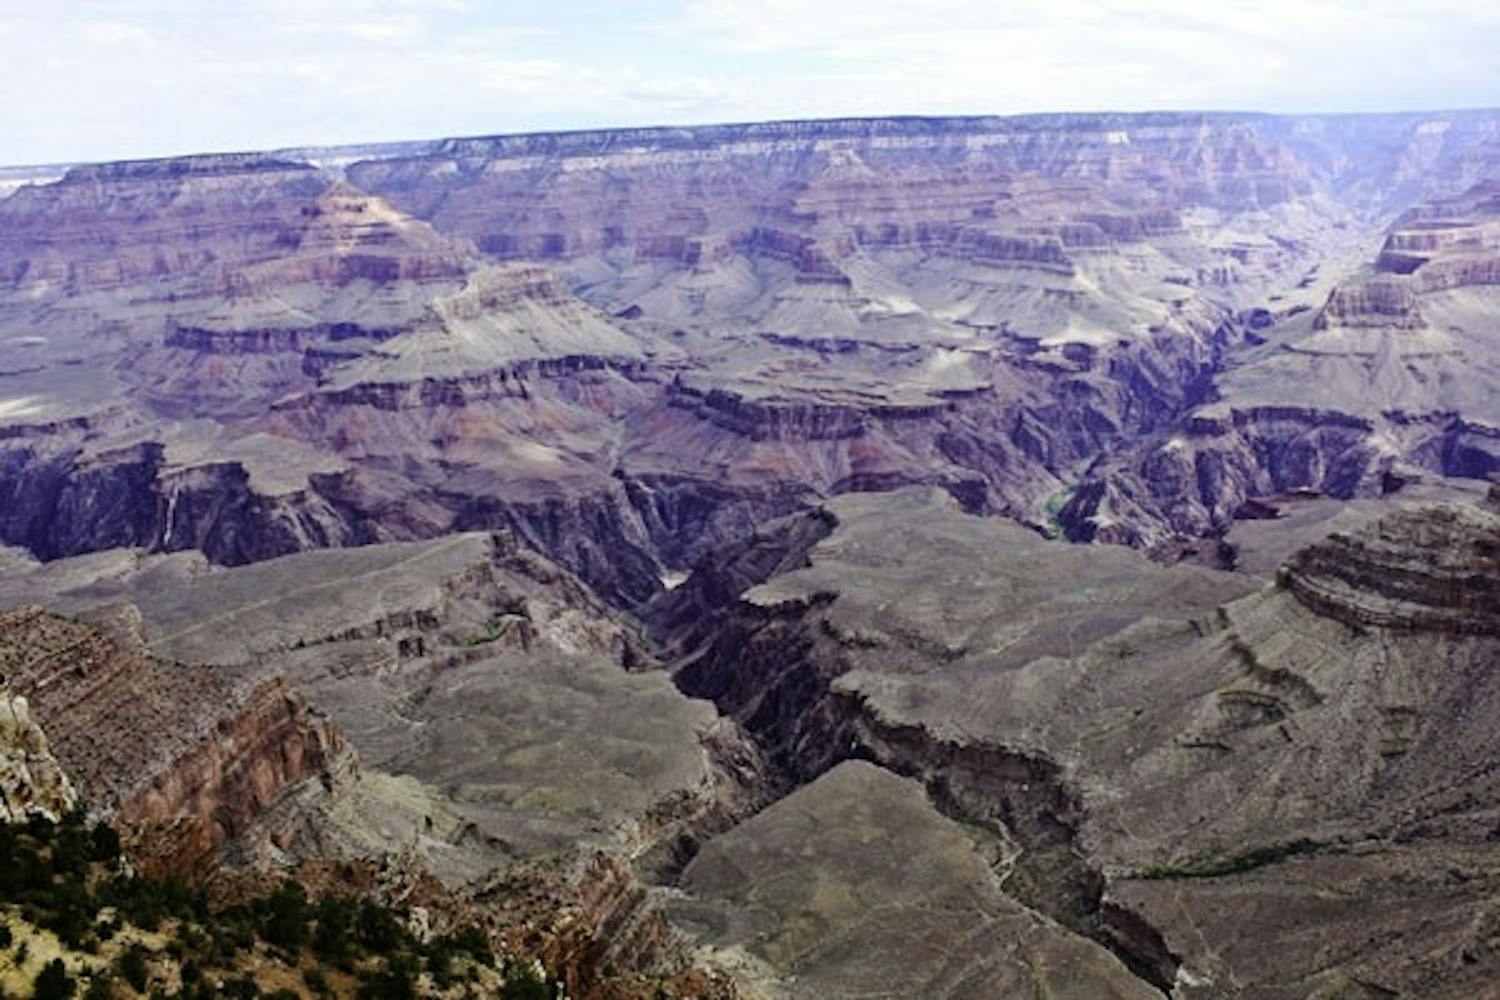 The Grand Canyon will be included in a number of state parks Arizona lawmakers are requesting to take from federal protection with Proposition 120. The state plans to use parts of the parks for mining and agricultural development. (Photo by Manikandan Vijayakumar)